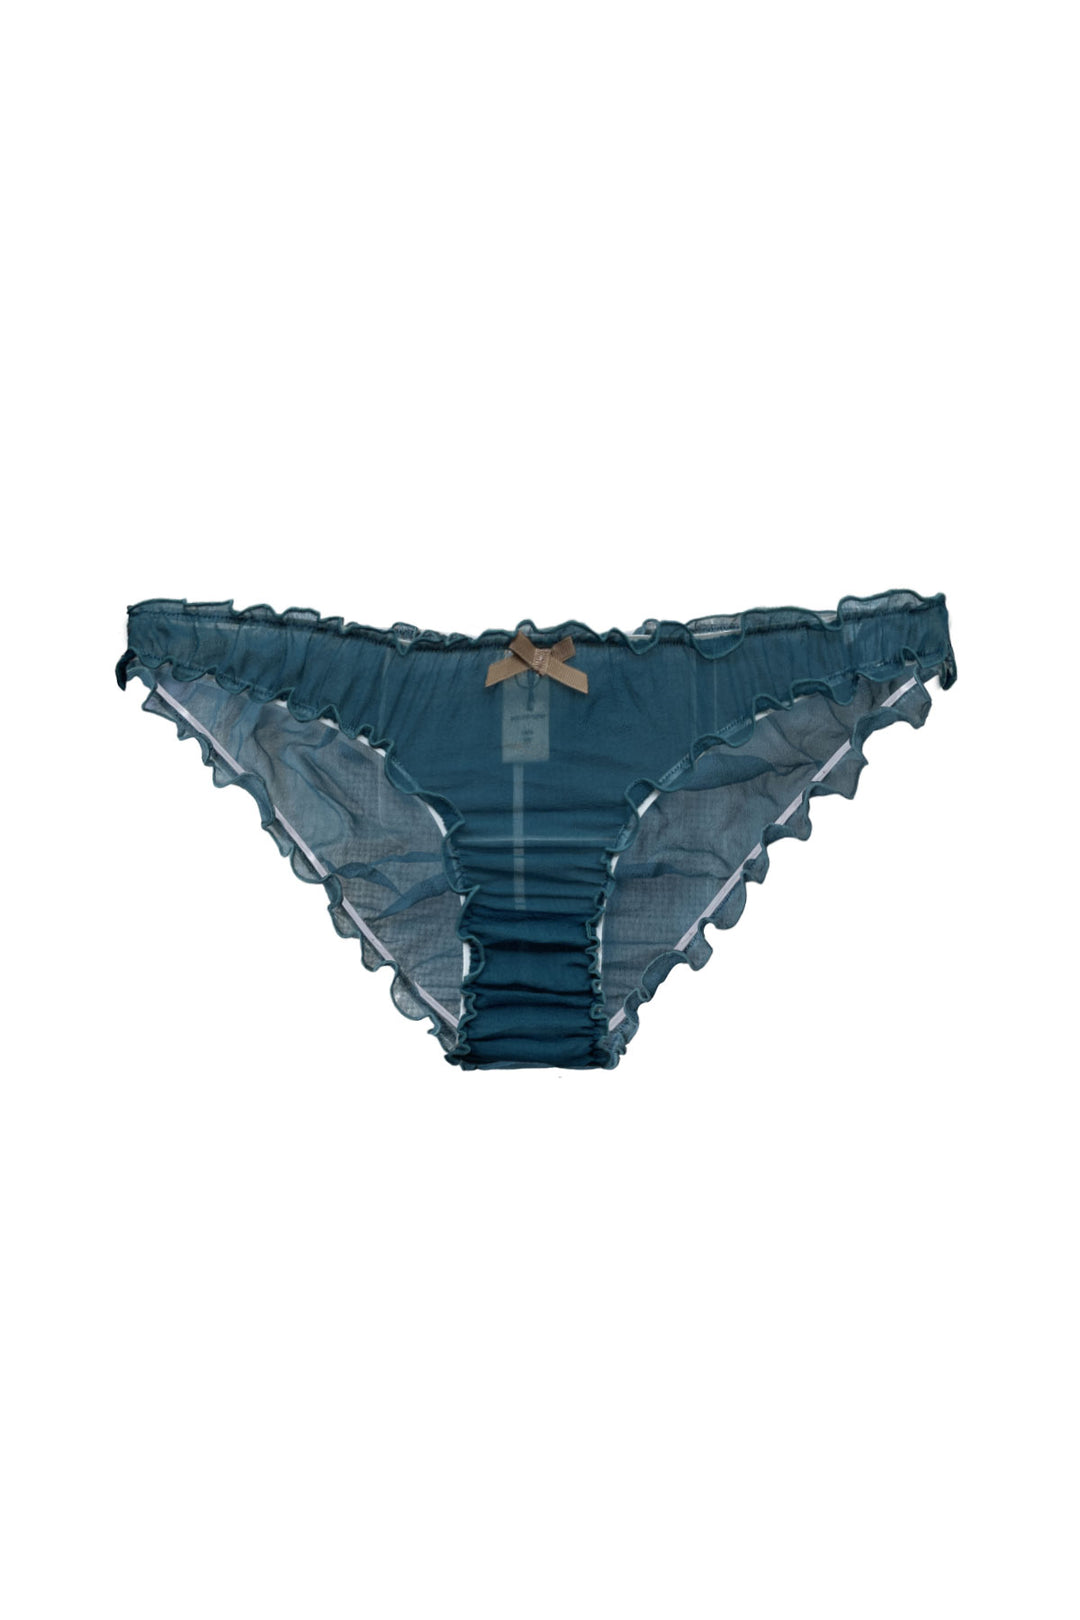 silk chiffon ruffle knickers in teal colour, eco lingerie